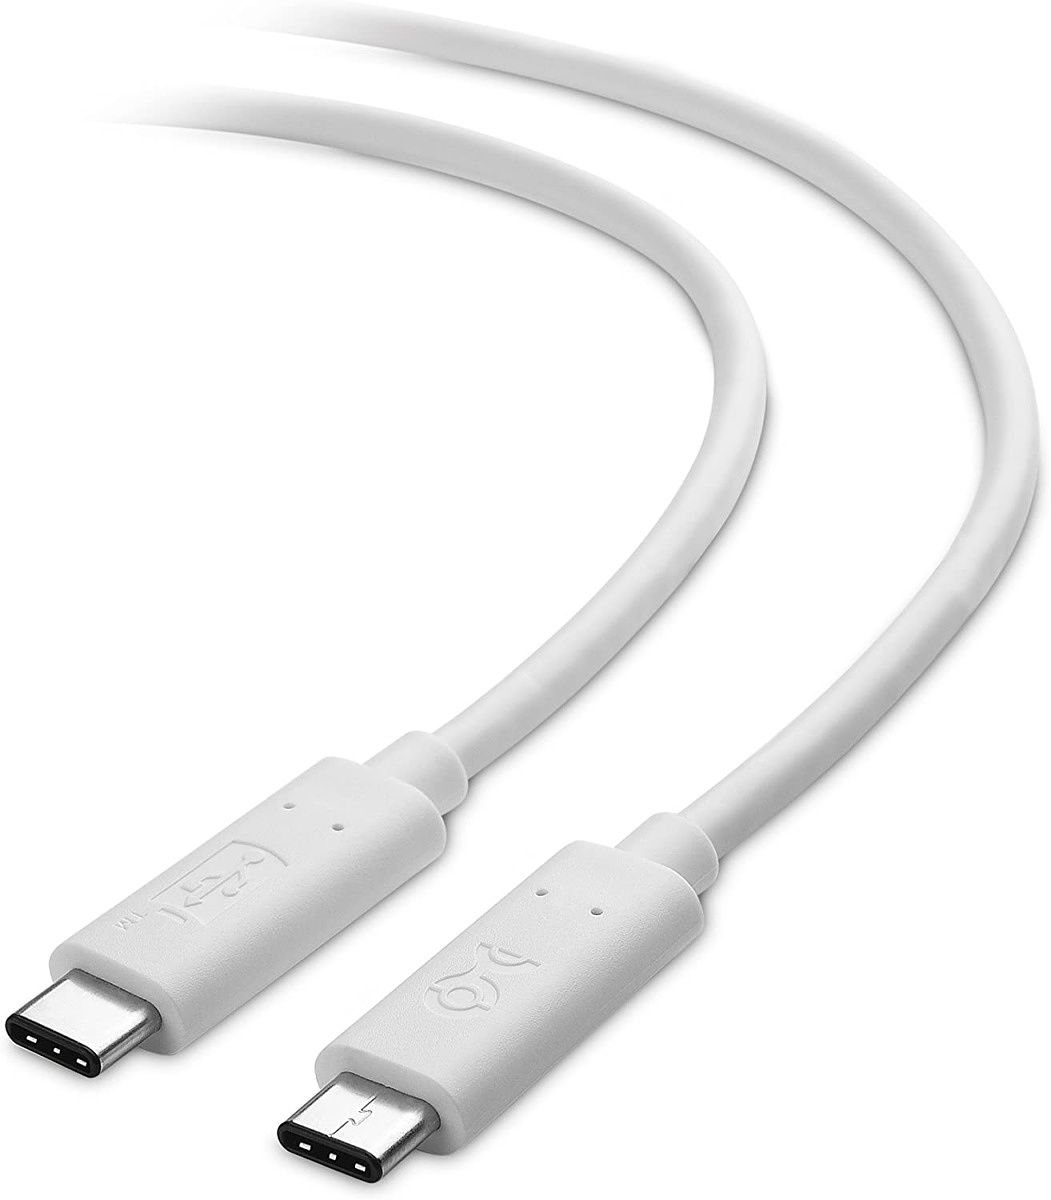 This Cable Matters cable is great if you want a cord for superfast charging. It supports up to 100W power delivery, and meets USB 2.0 specifications. The cable is offered in 3.3 feet and 6.6 feet sizes.